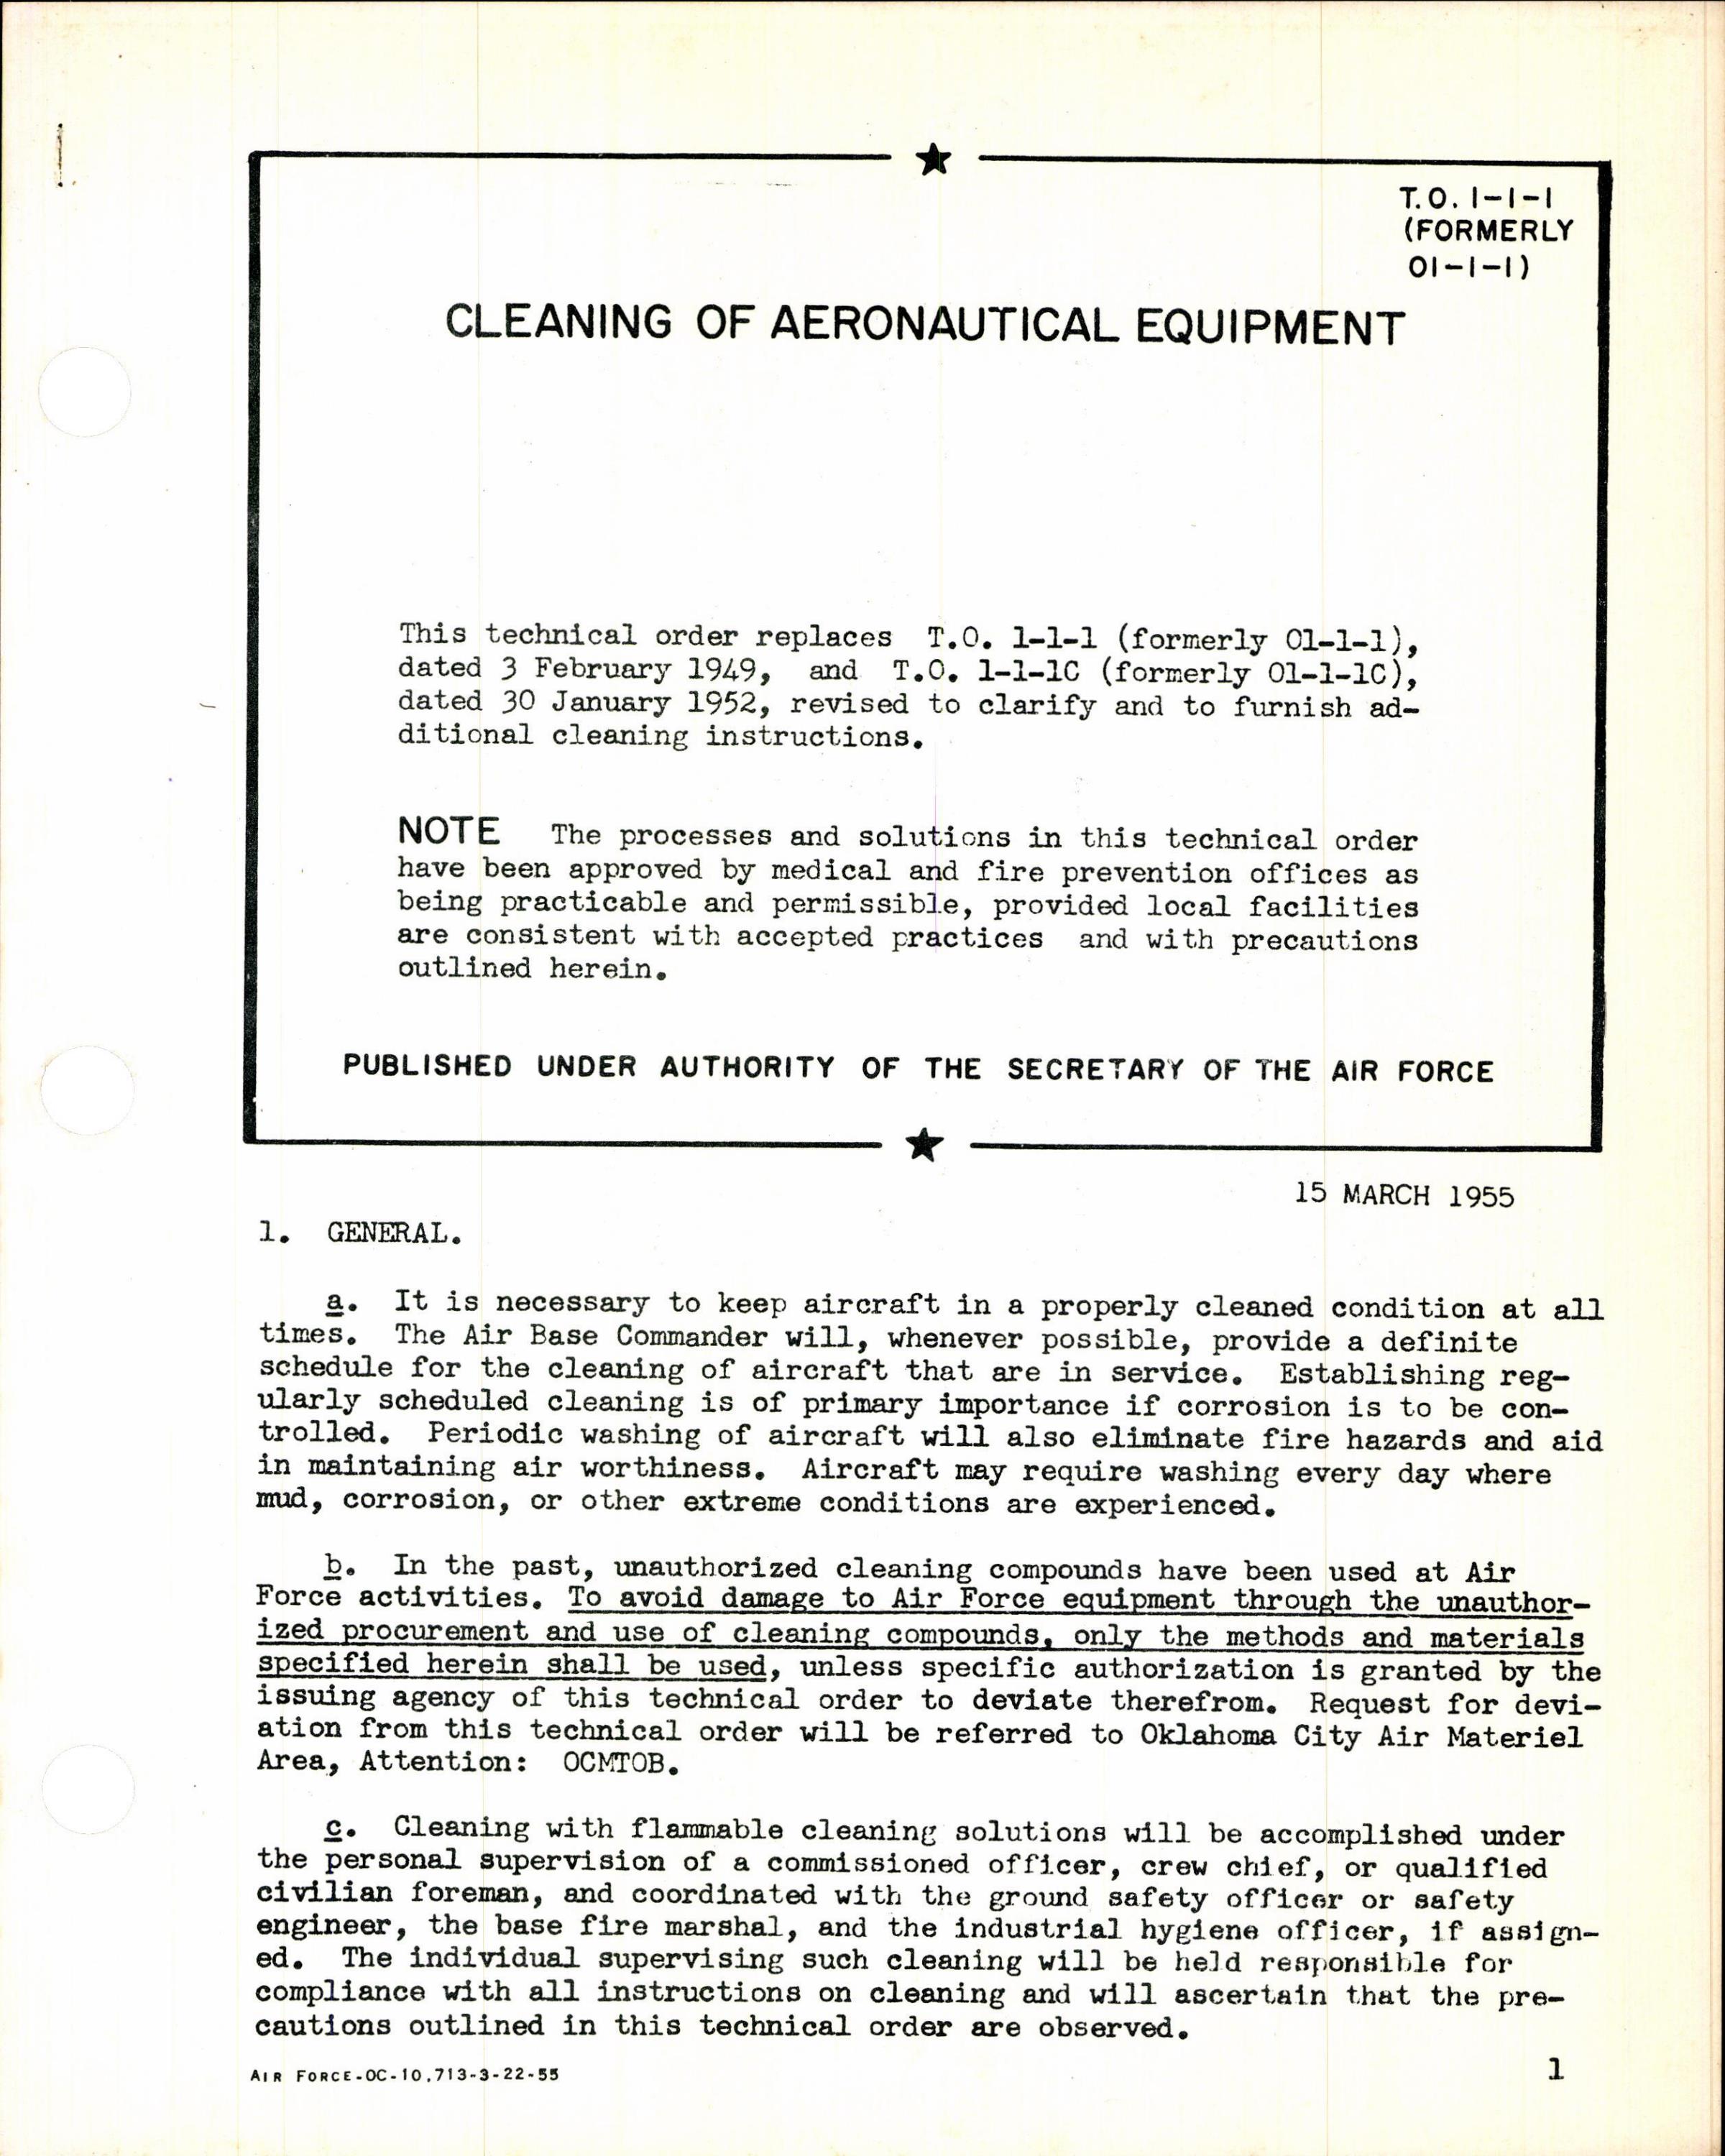 Sample page 1 from AirCorps Library document: Cleaning of Aeronautical Equipment